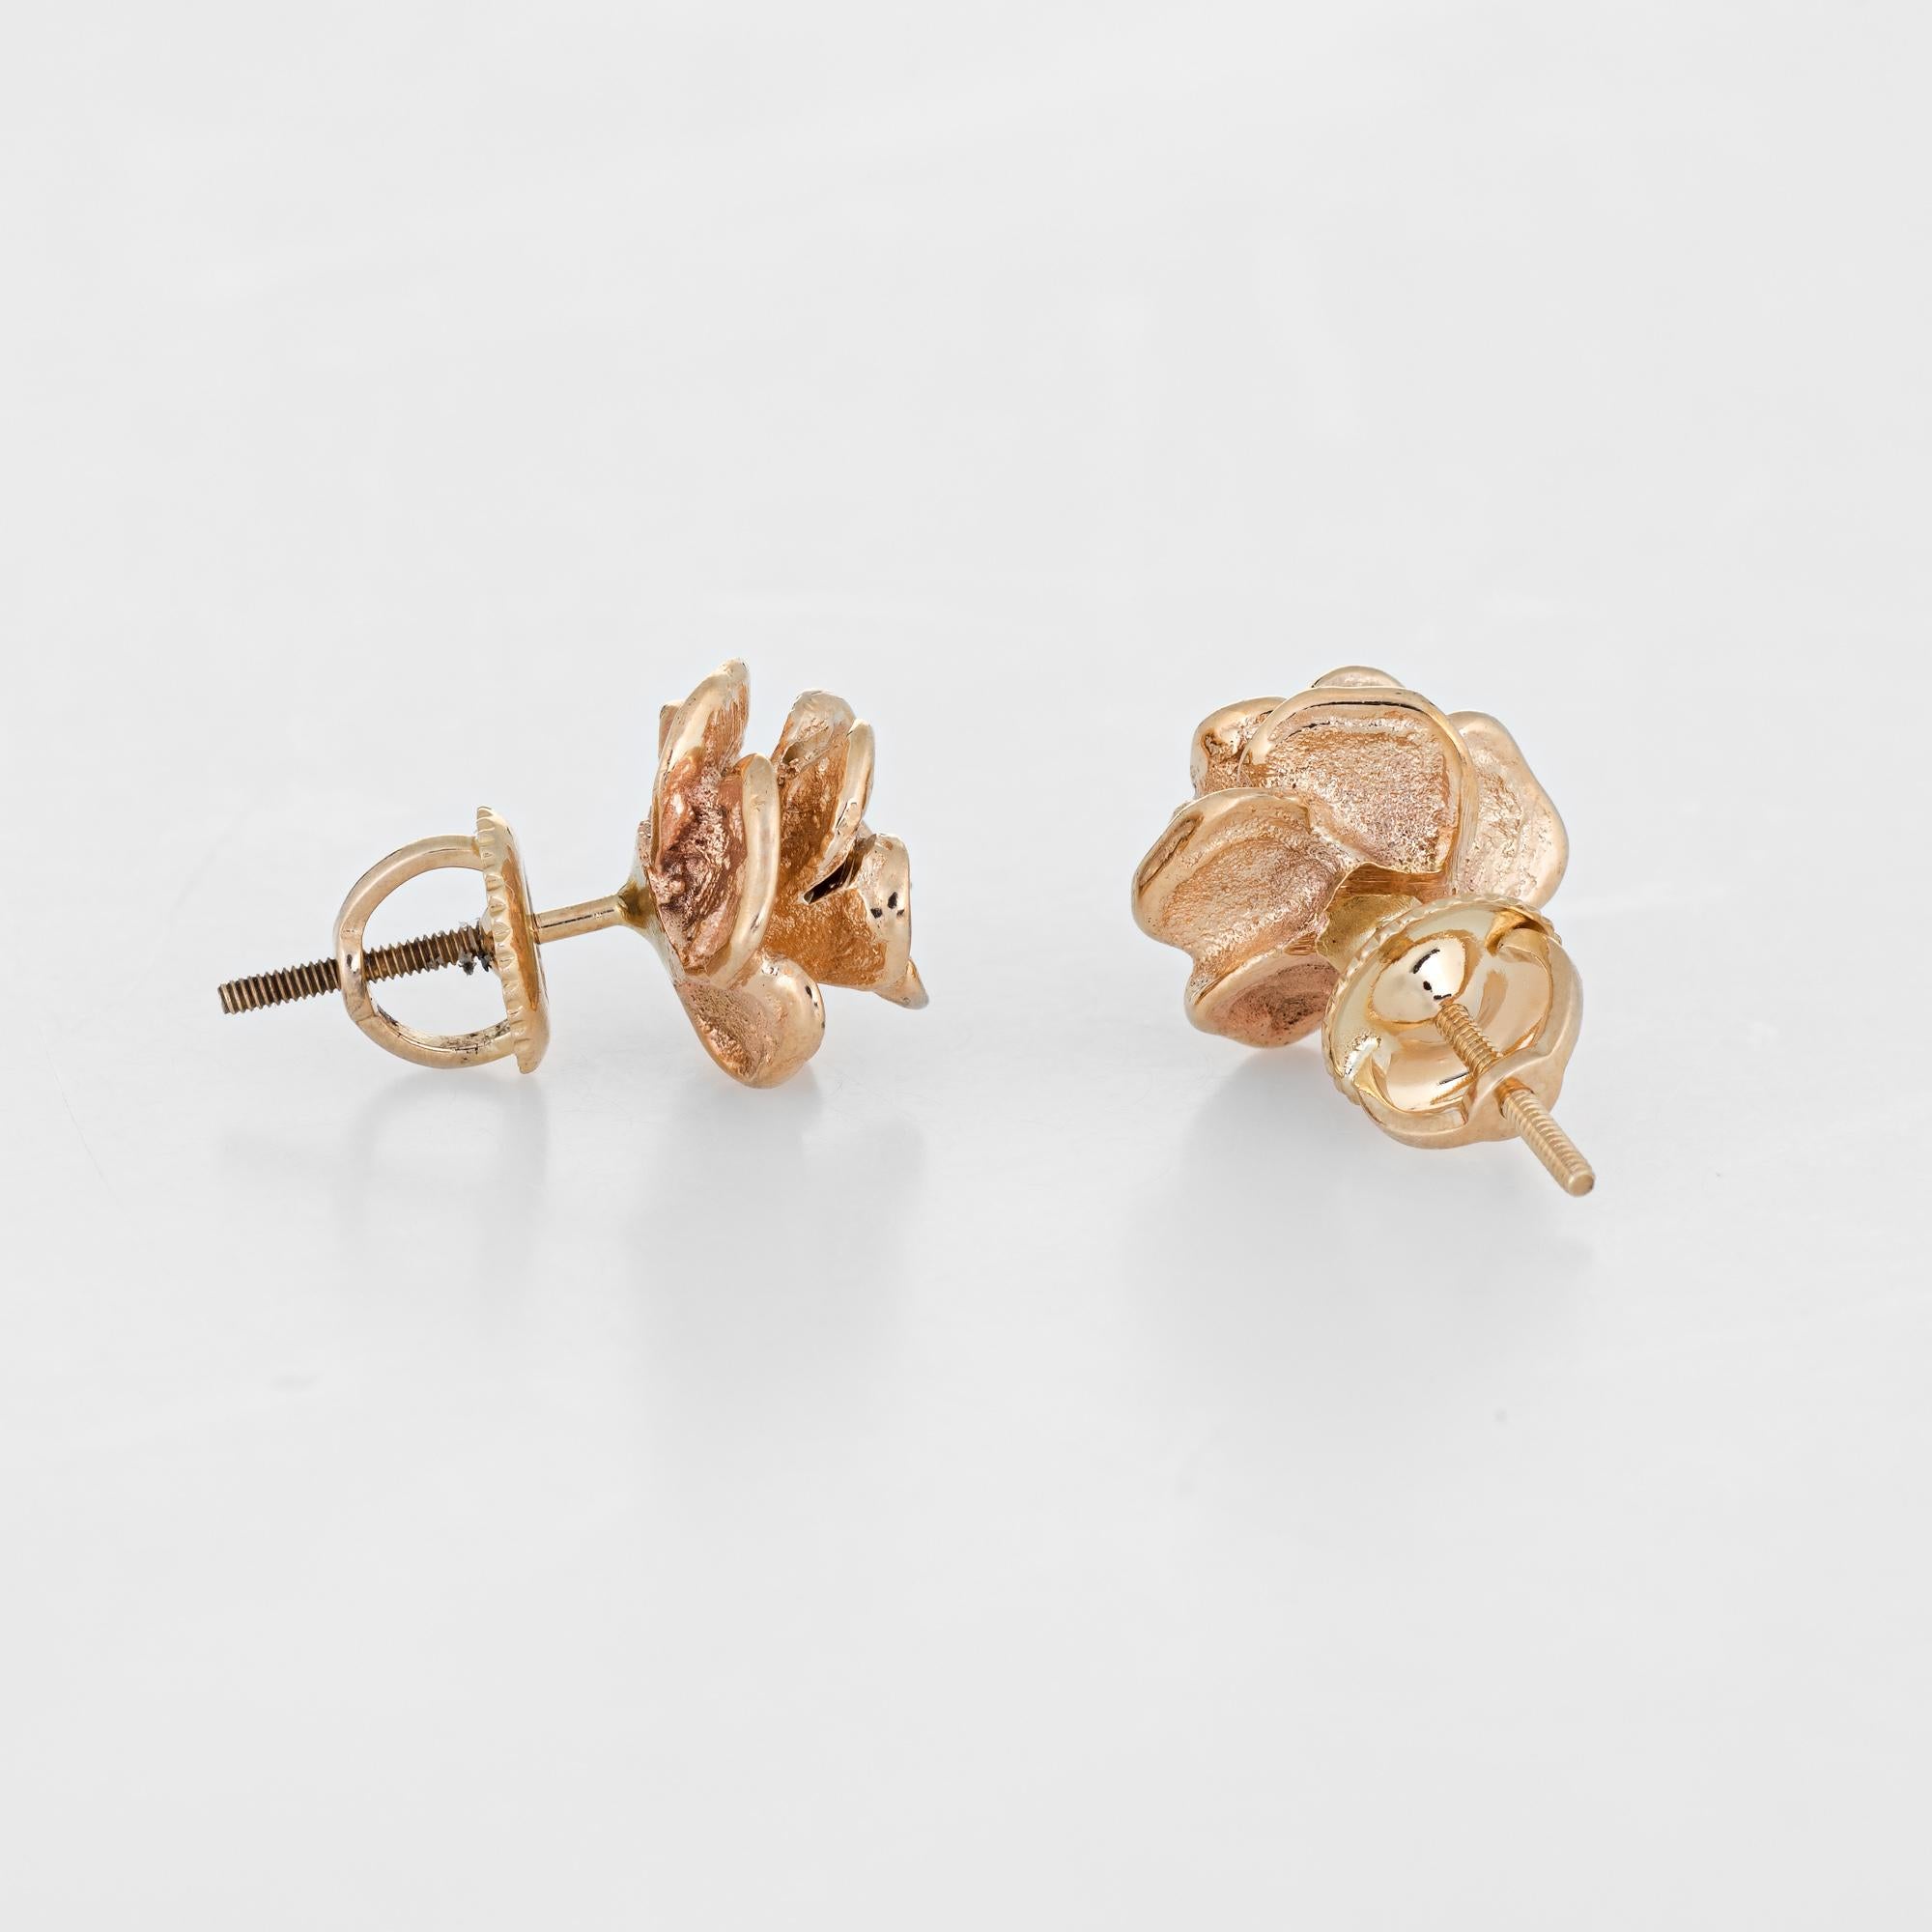 Finely detailed pair of vintage diamond stud earrings, crafted in 14k yellow gold. 

Two estimated 0.25 carat round brilliant cut diamonds are set into the mounts. The total diamond weight is estimated at 0.50 carats (estimated at G-H color and SI2